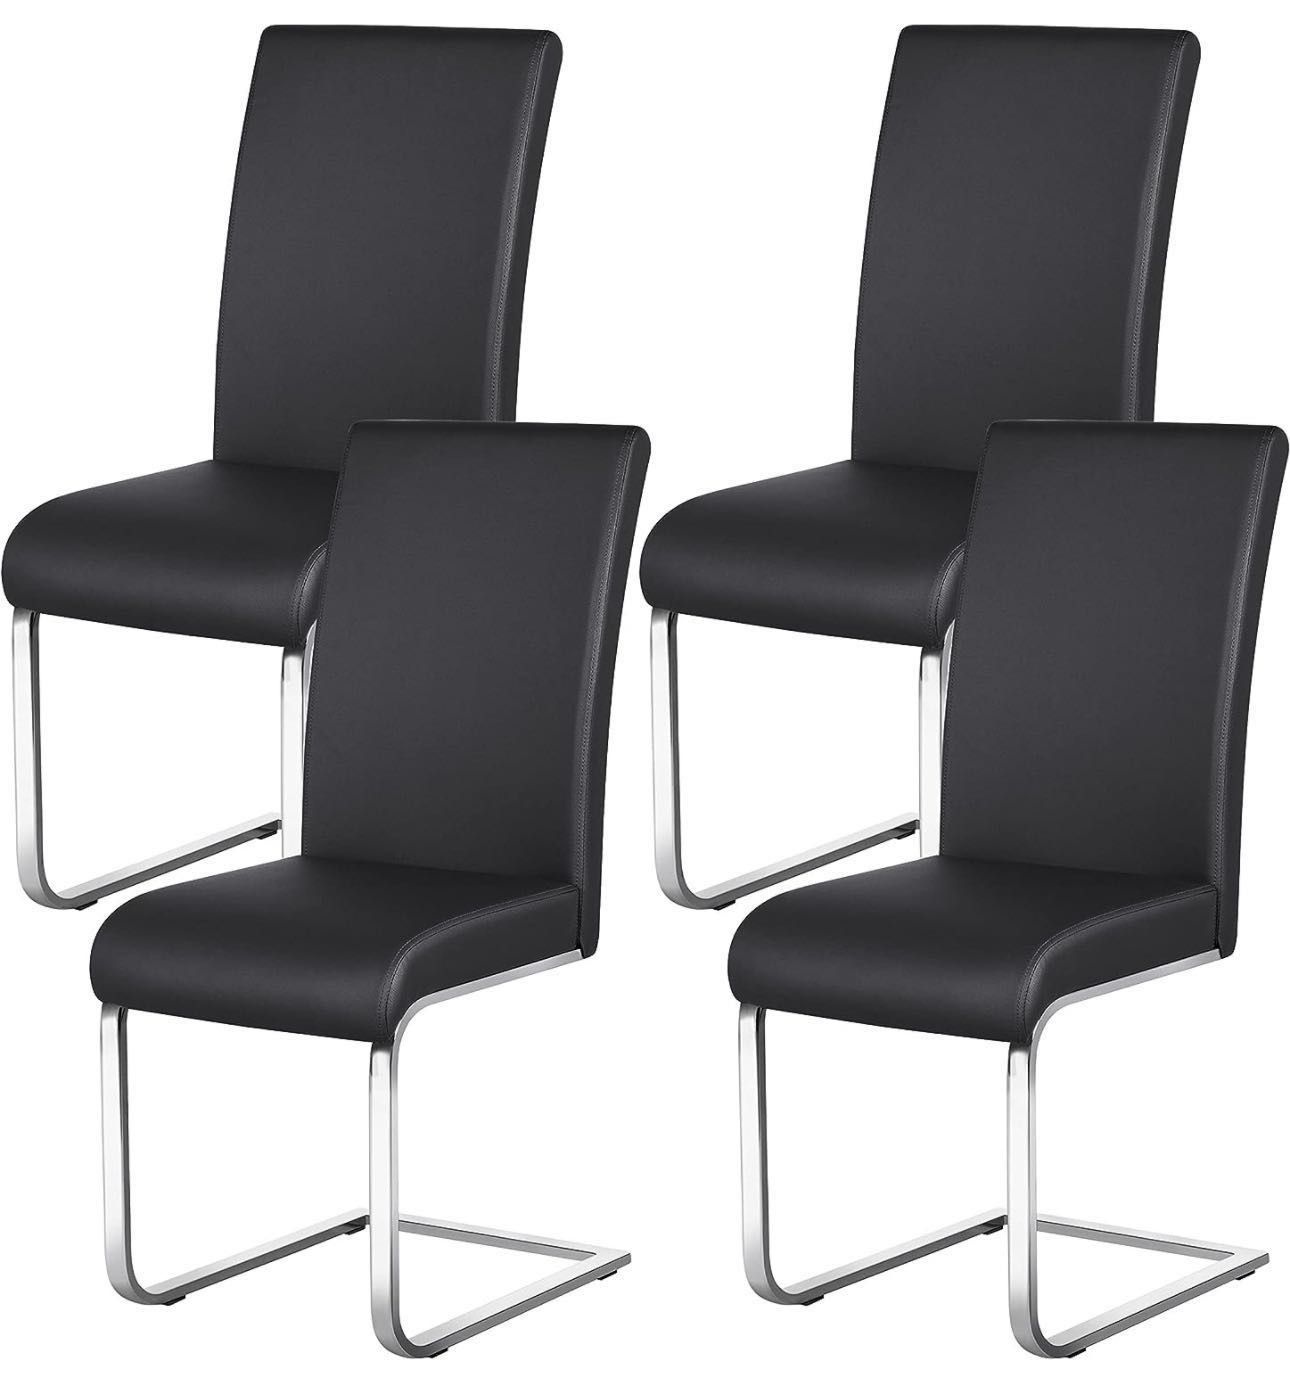 4pcs Dining Chairs Armless Leather Dining/Desk Room Kitchen Chairs with Upholstered Seat, Metal Legs and High Back for Kitchen, Living Room, Leisure, 